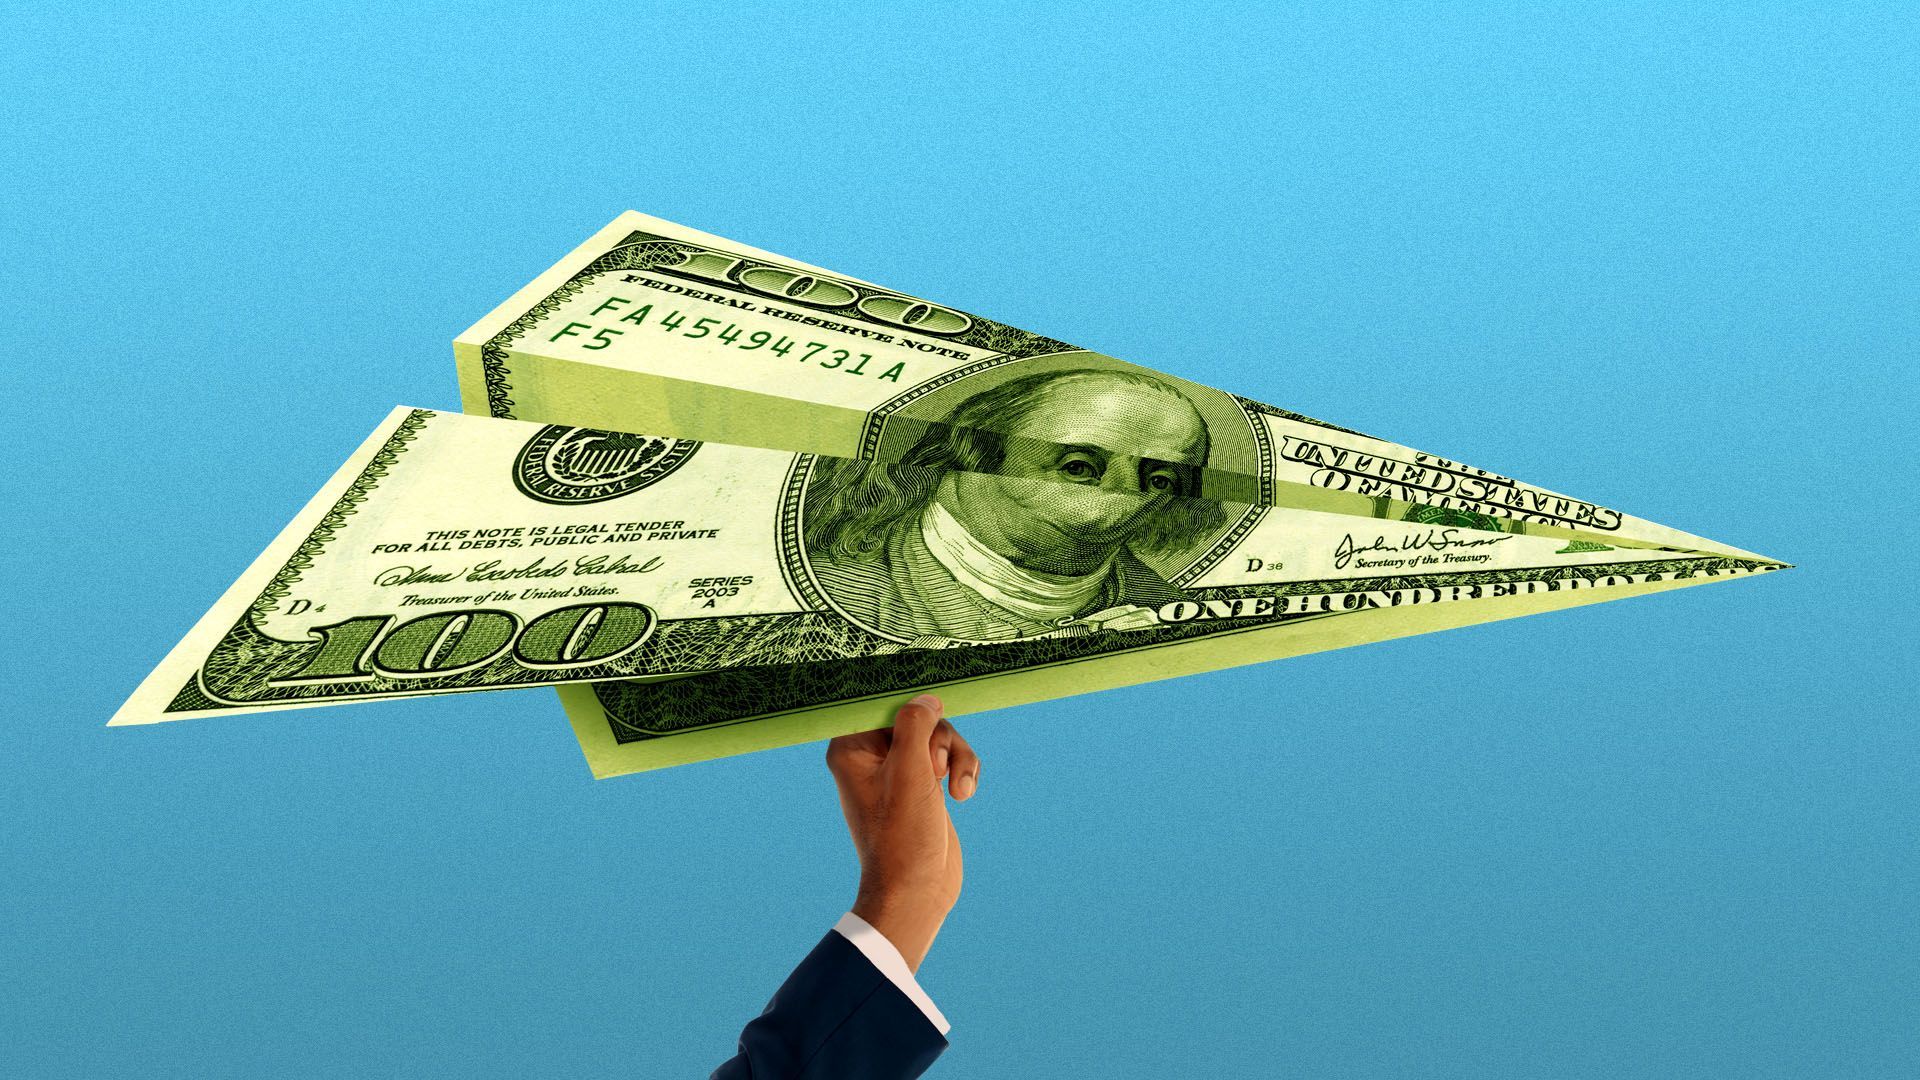 Illustration of a hand in a suit holding a giant hundred dollar bill paper airplane